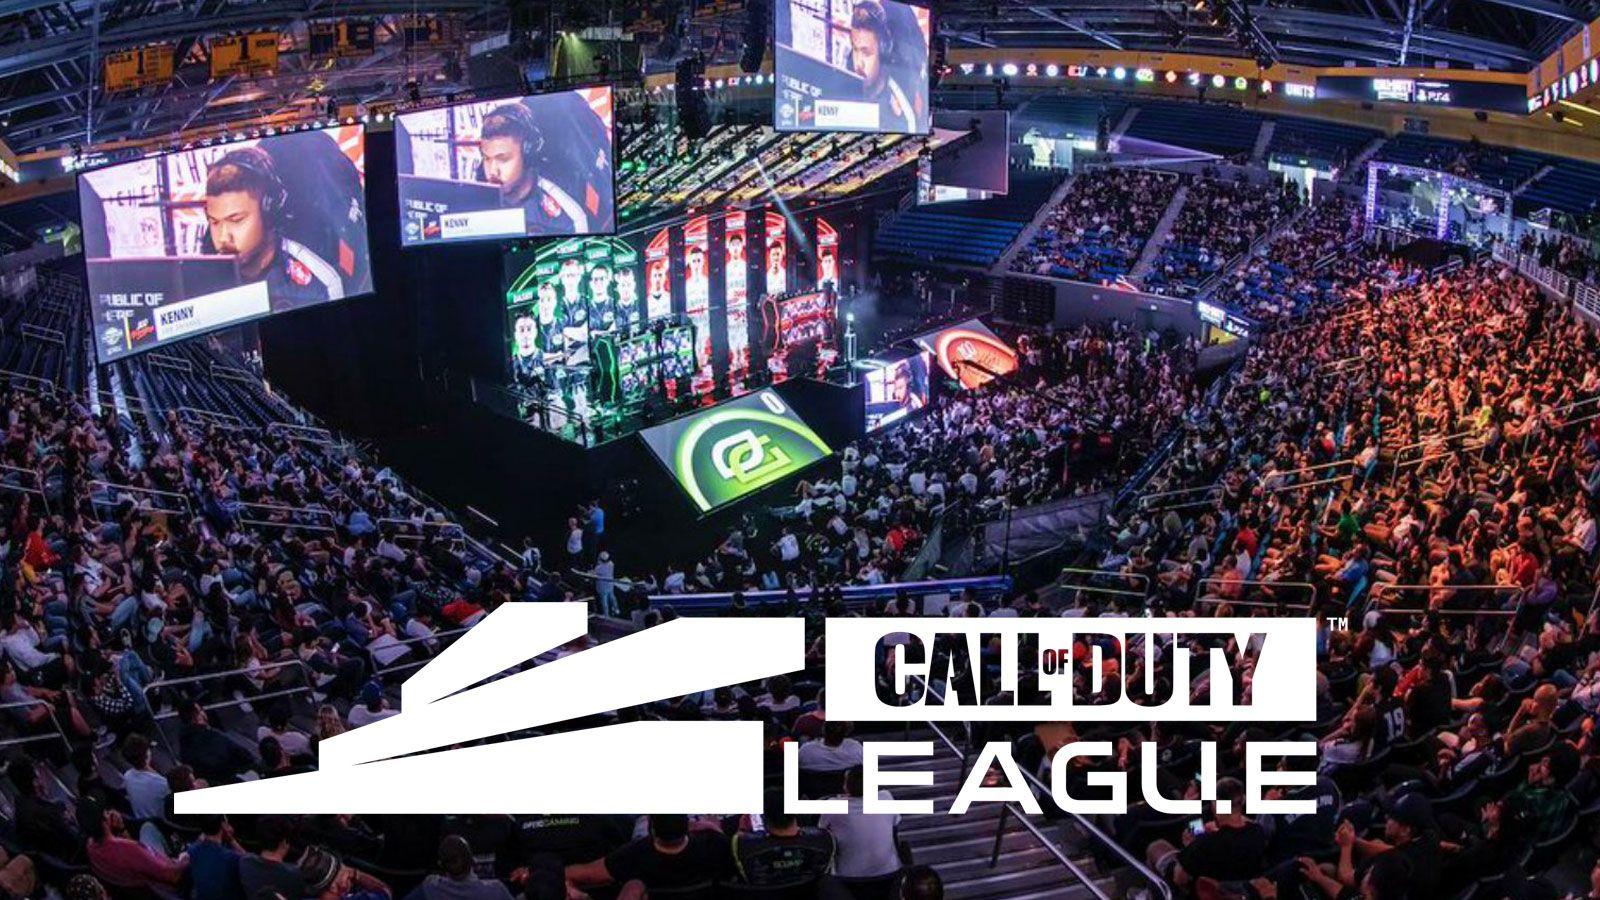 Call of Duty League Arena